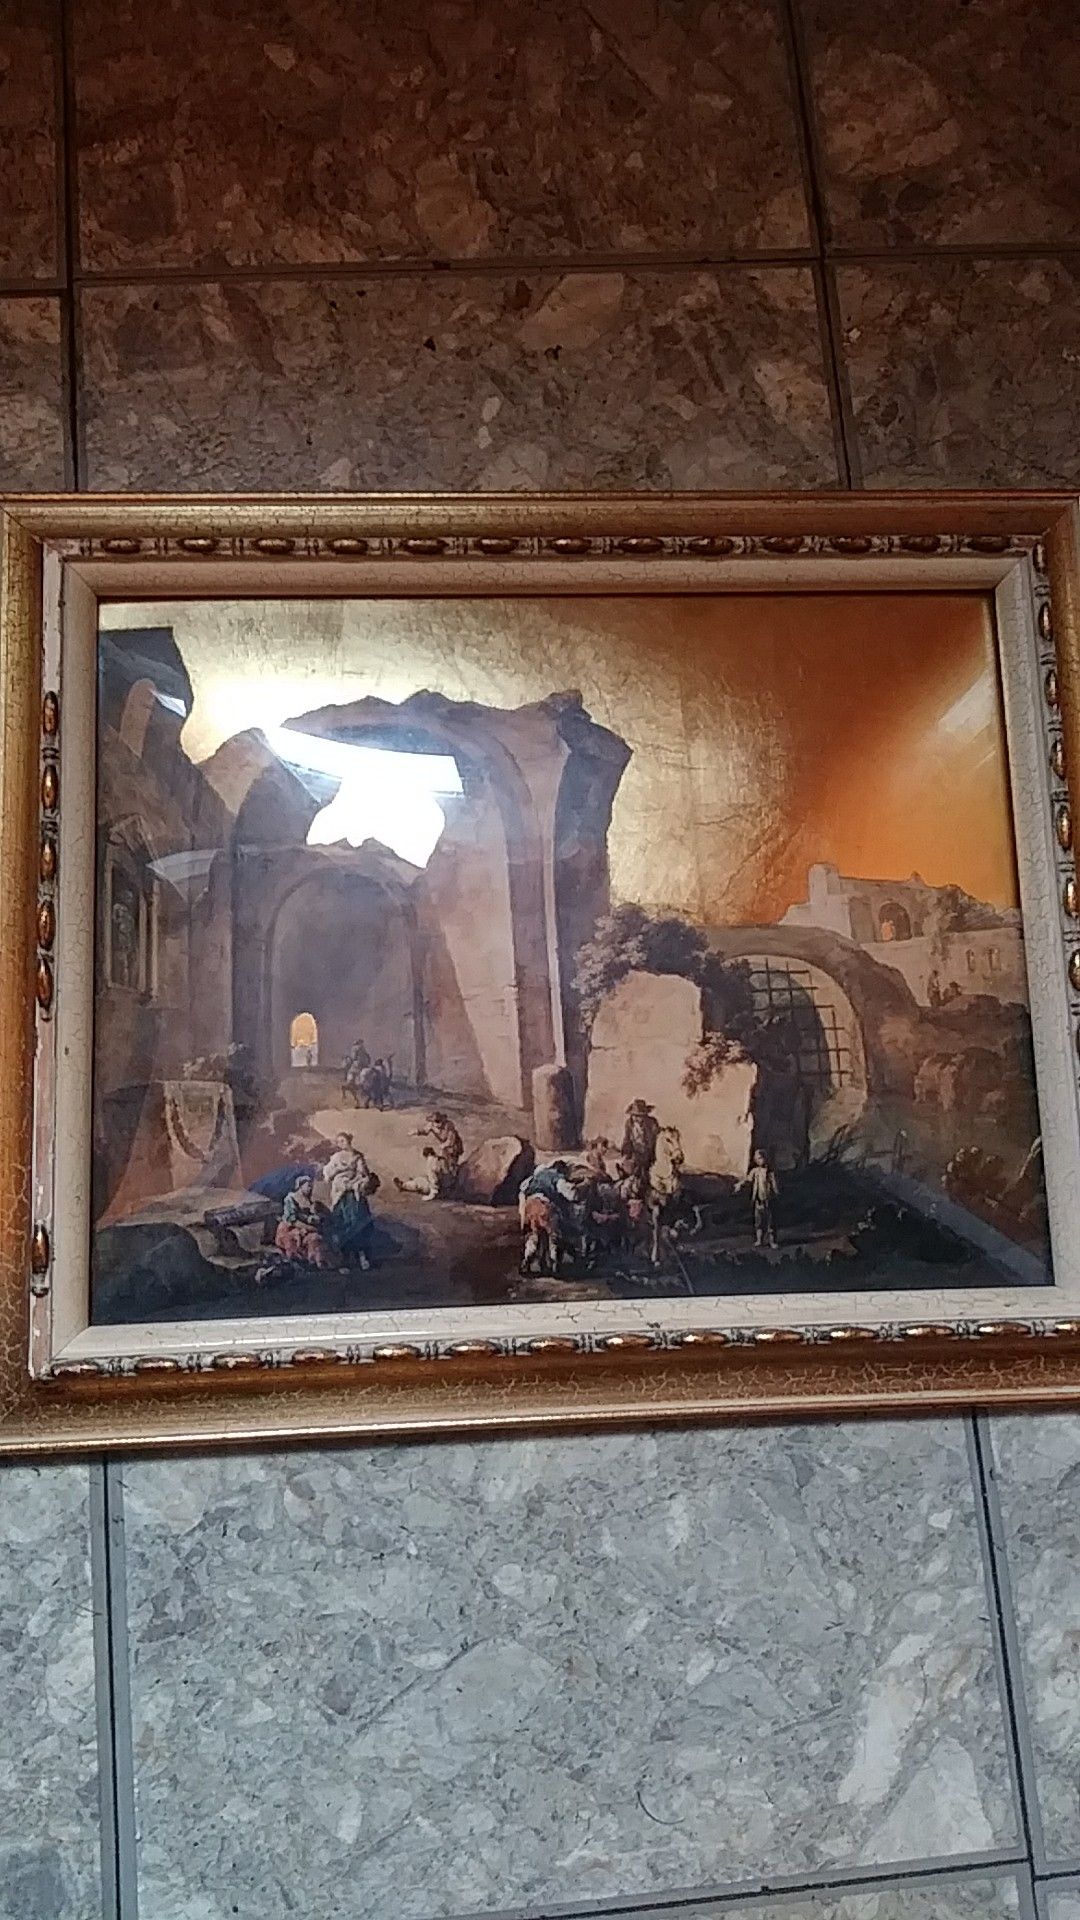 24 karat gold metal picture Roman ruins curved glass